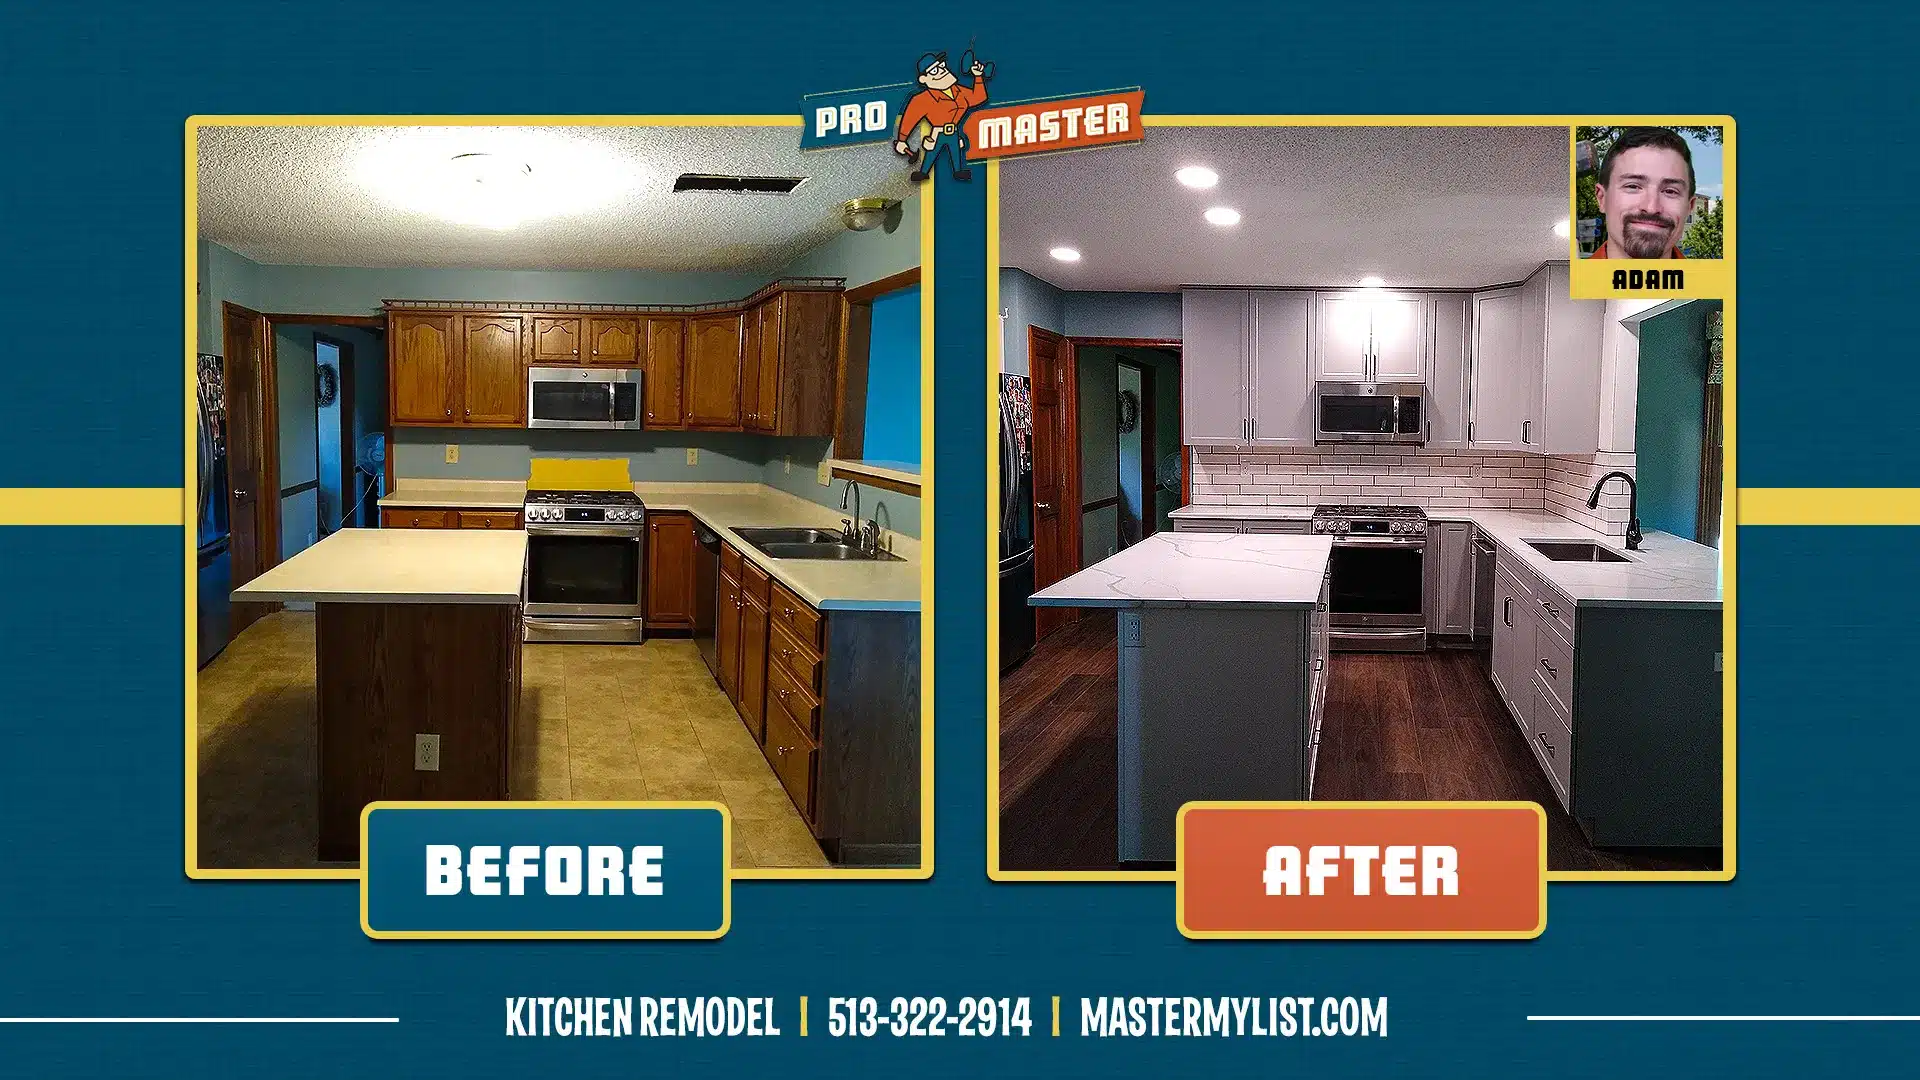 Before and After comparison of a kitchen remodel performed by ProMaster in Cincinnati, OH.